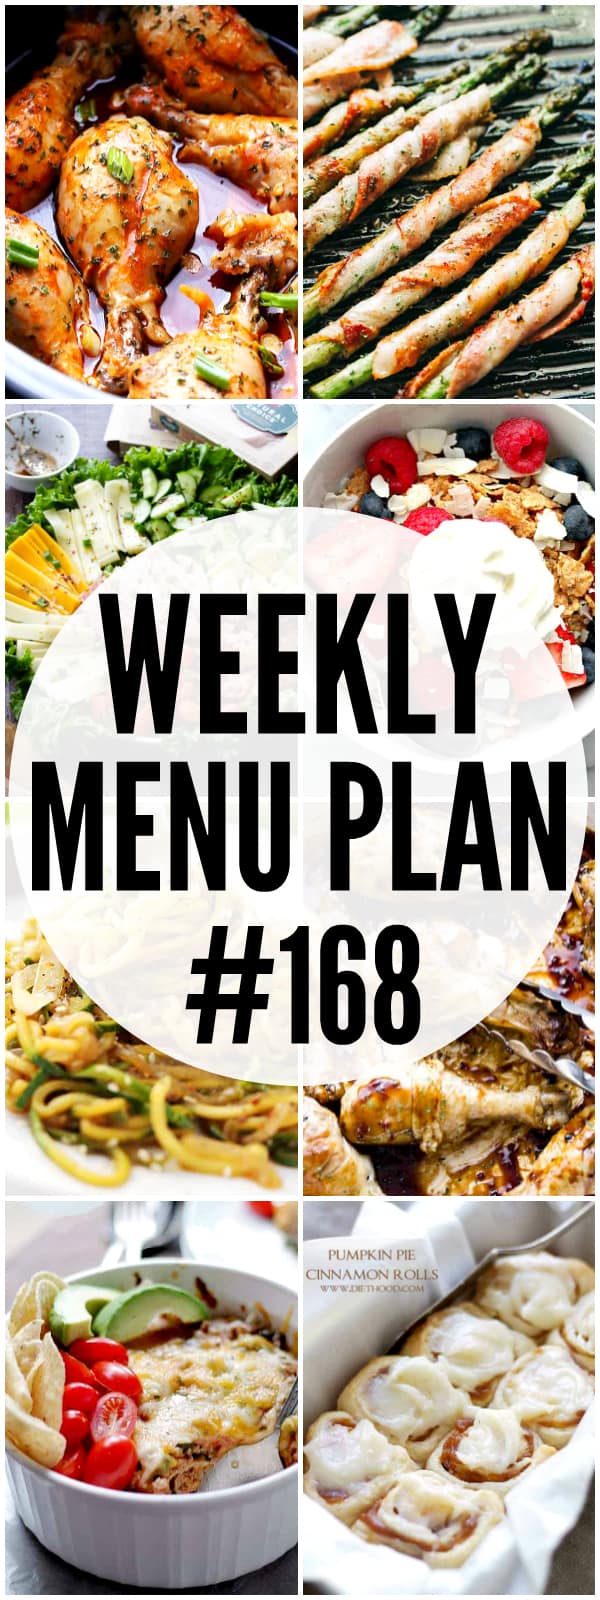 WEEKLY MENU PLAN (#168) - A delicious collection of dinner, side dish and dessert recipes to help you plan your weekly menu and make life easier for you! #mealplan #mealprep #menuprep #menuplan #dinnerrecipes #weeklymealplan #family #kids 